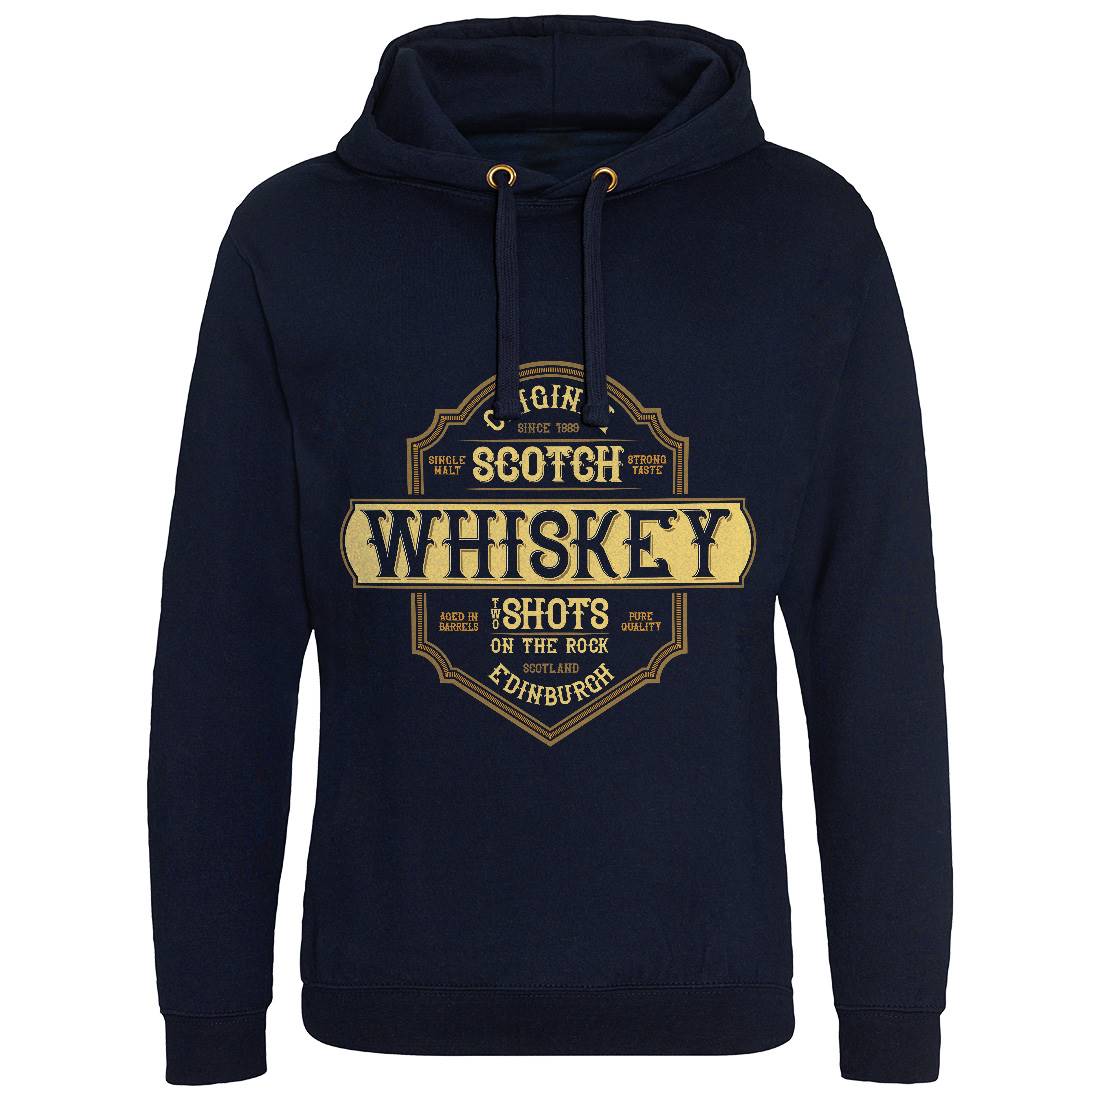 Scotch Whiskey Mens Hoodie Without Pocket Drinks B373